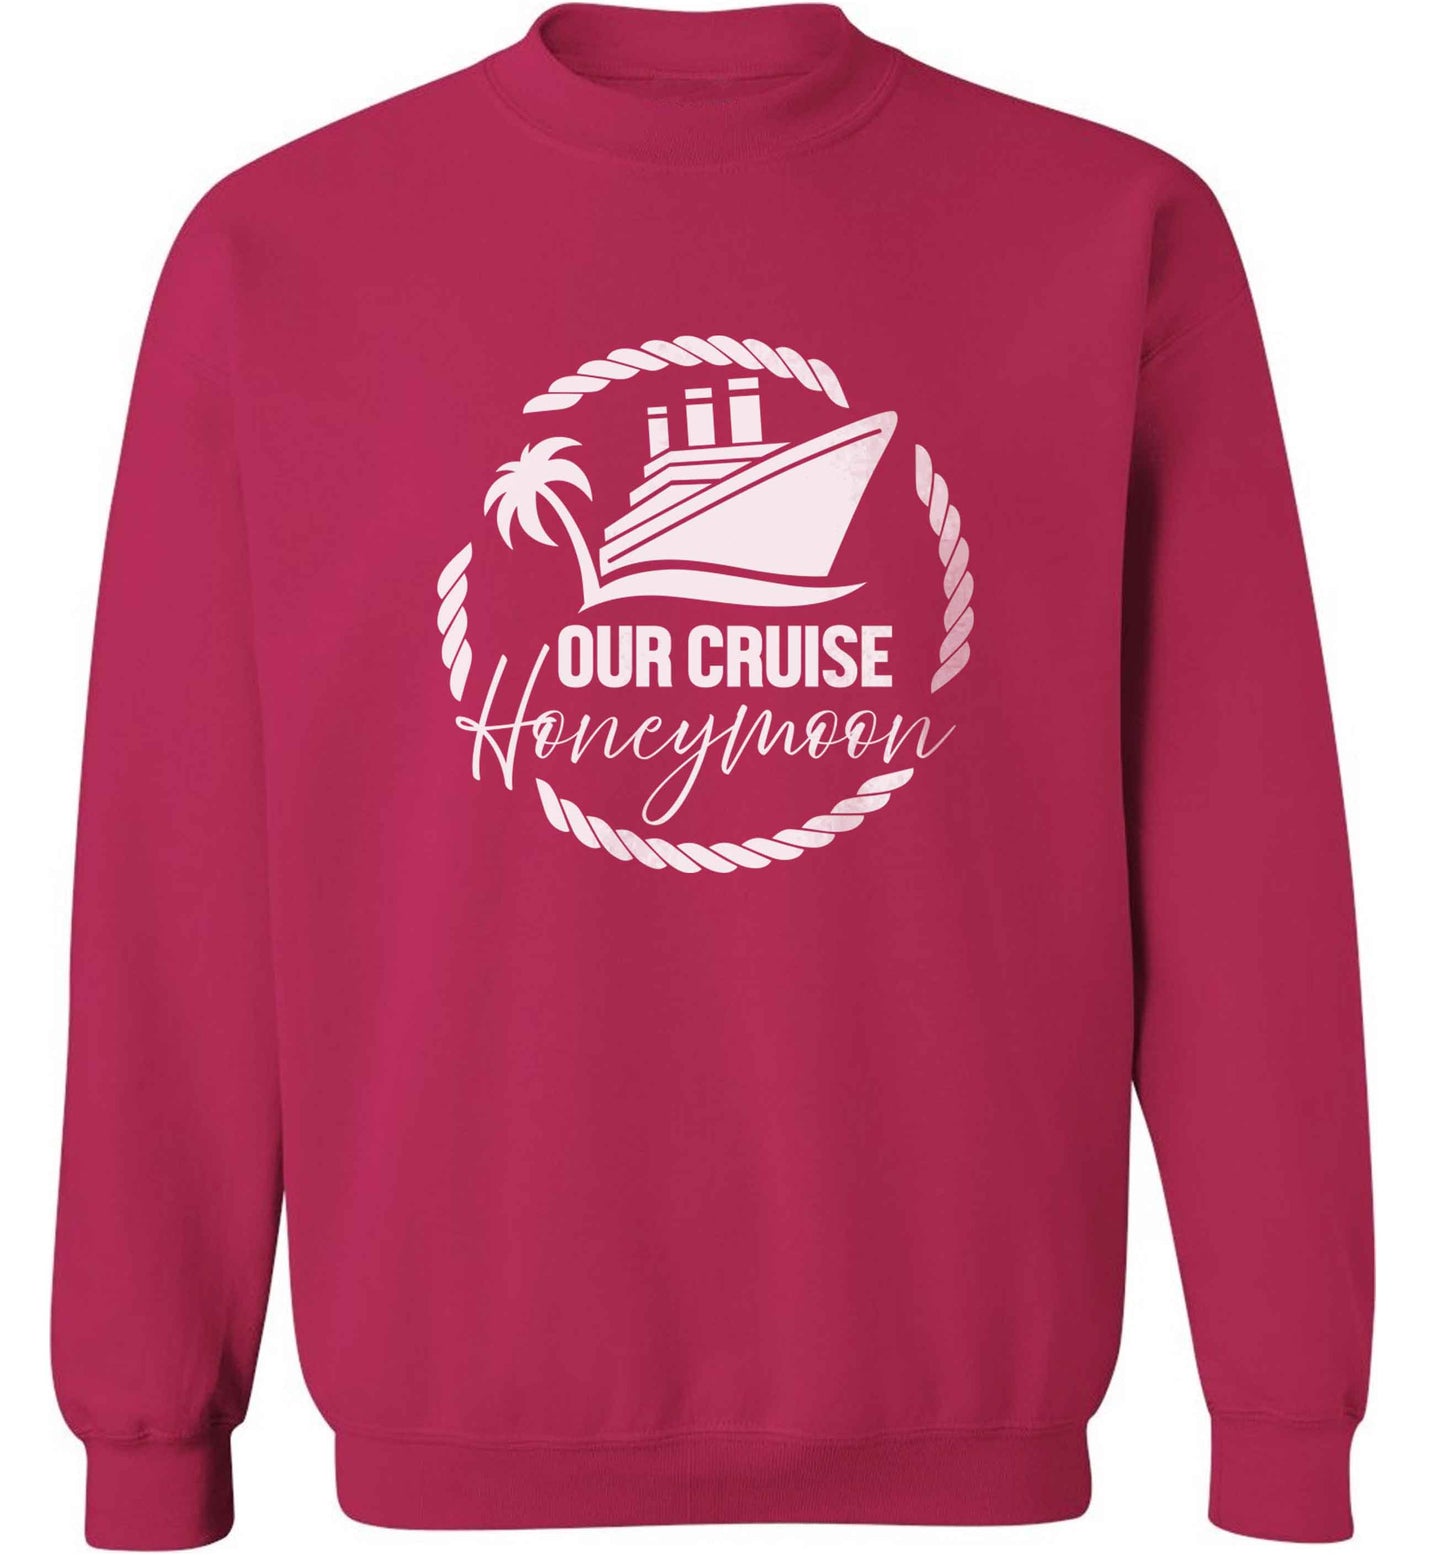 Our cruise honeymoon adult's unisex pink sweater 2XL